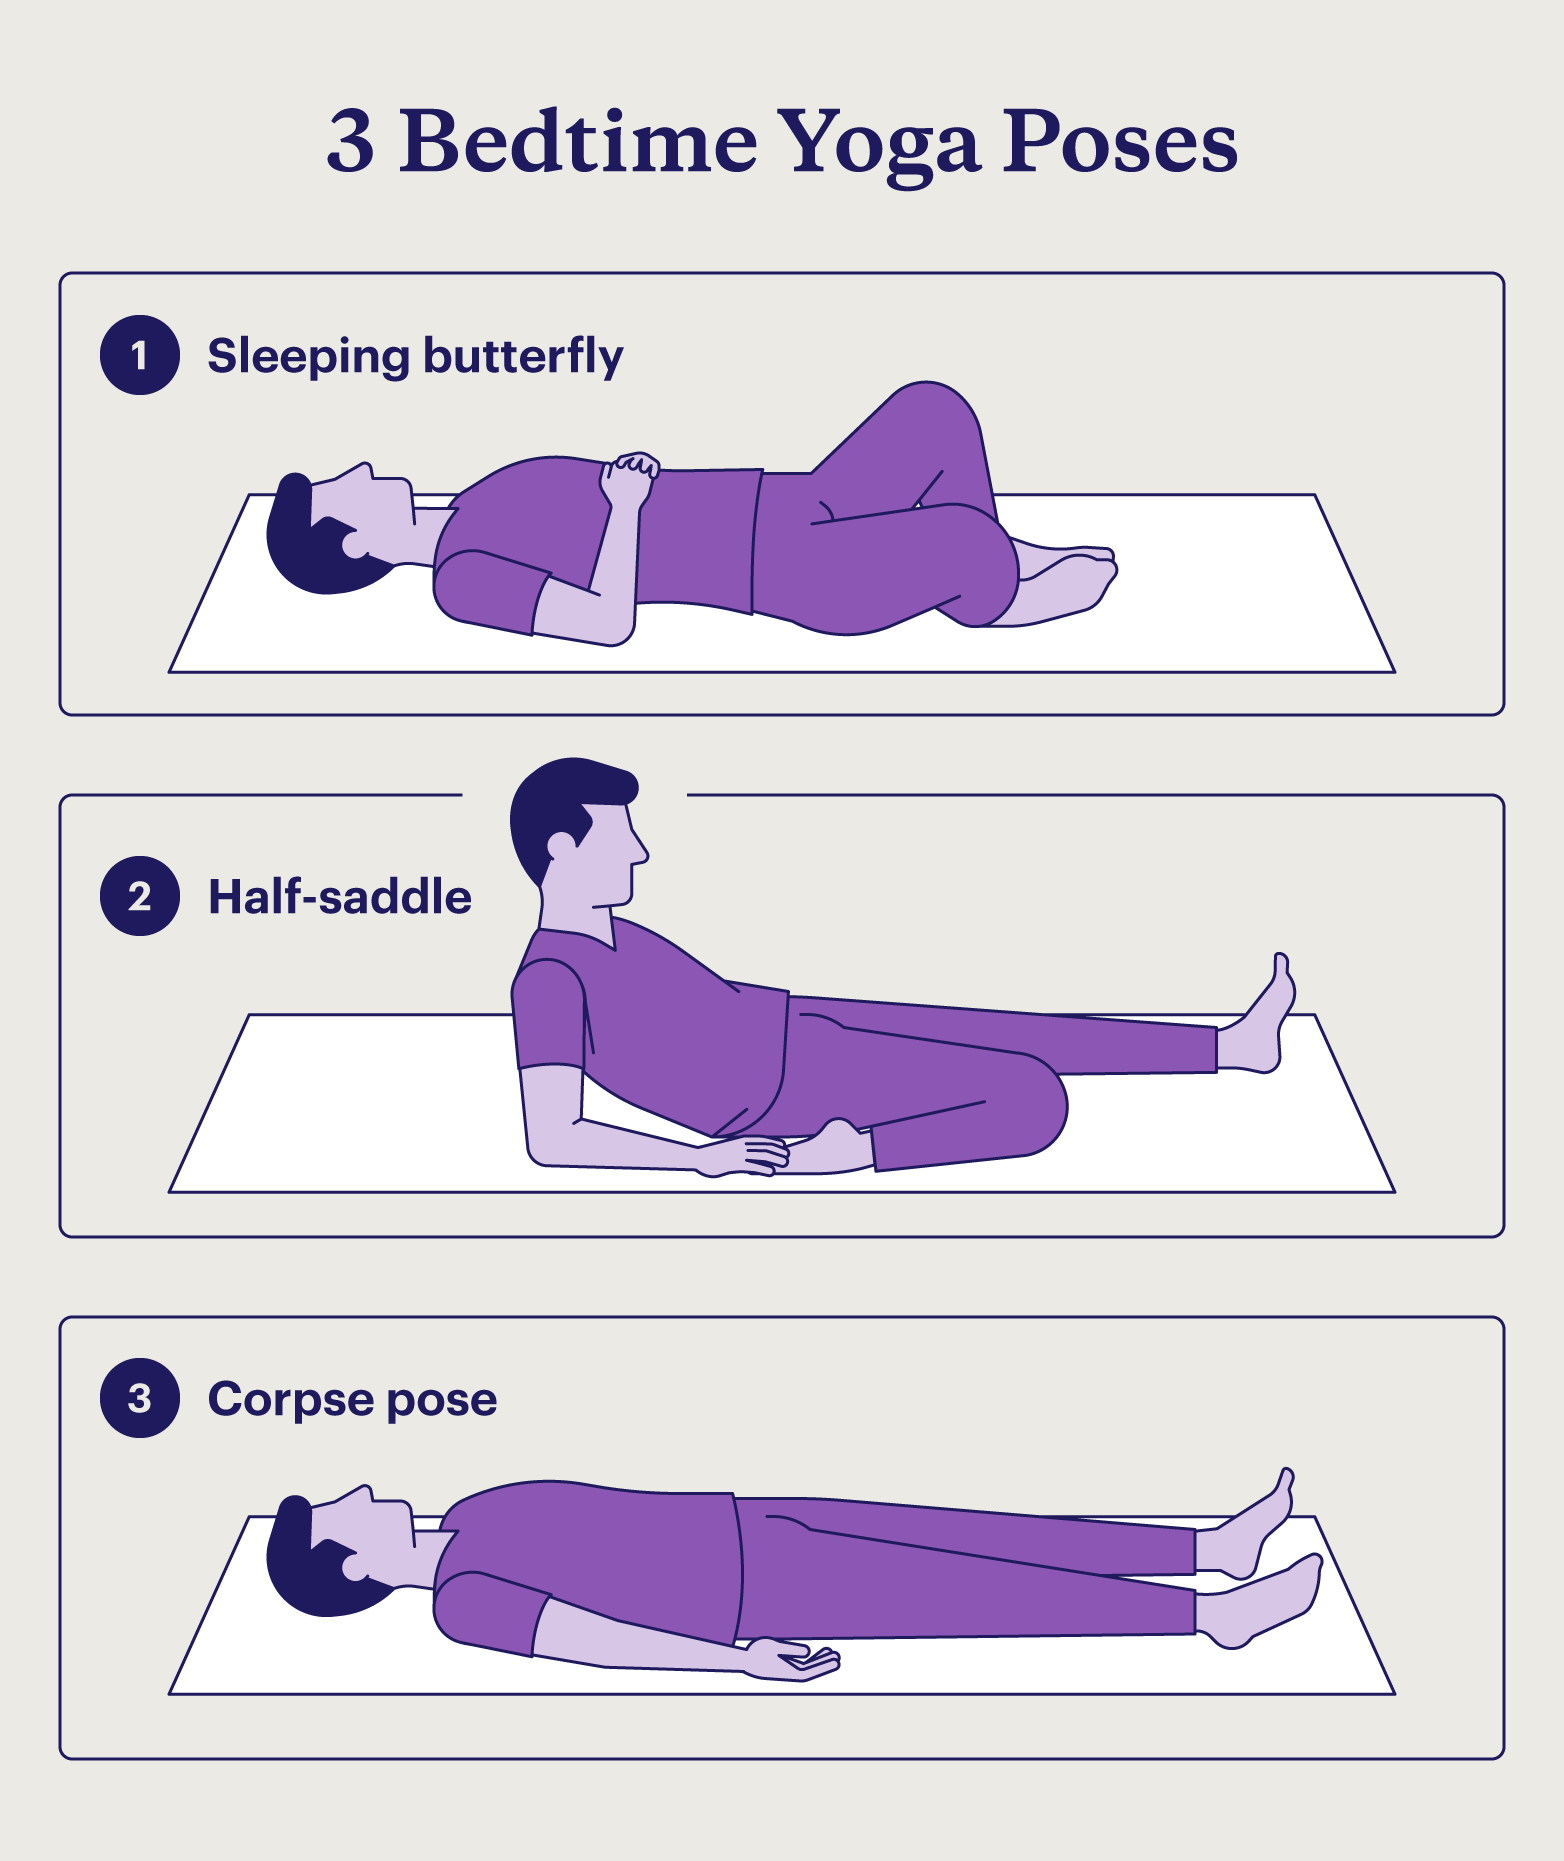 Three bedtime yoga poses that can help you sleep include sleeping butterfly, half-saddle, and corpse pose.